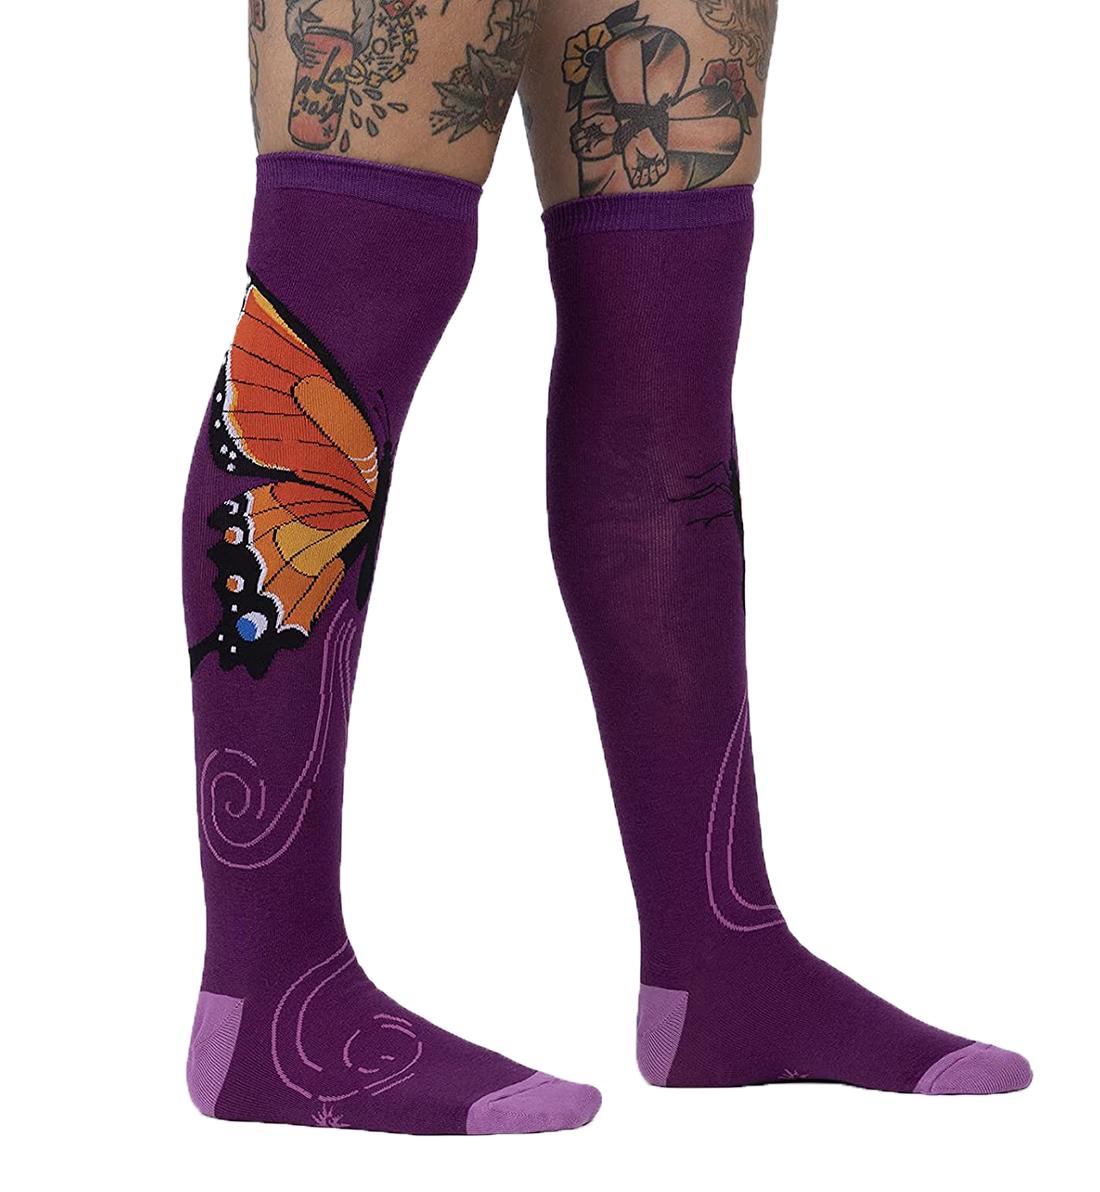 SOCK it to me Unisex Knee High Socks (F0561),The Monarch - The Monarch,One Size